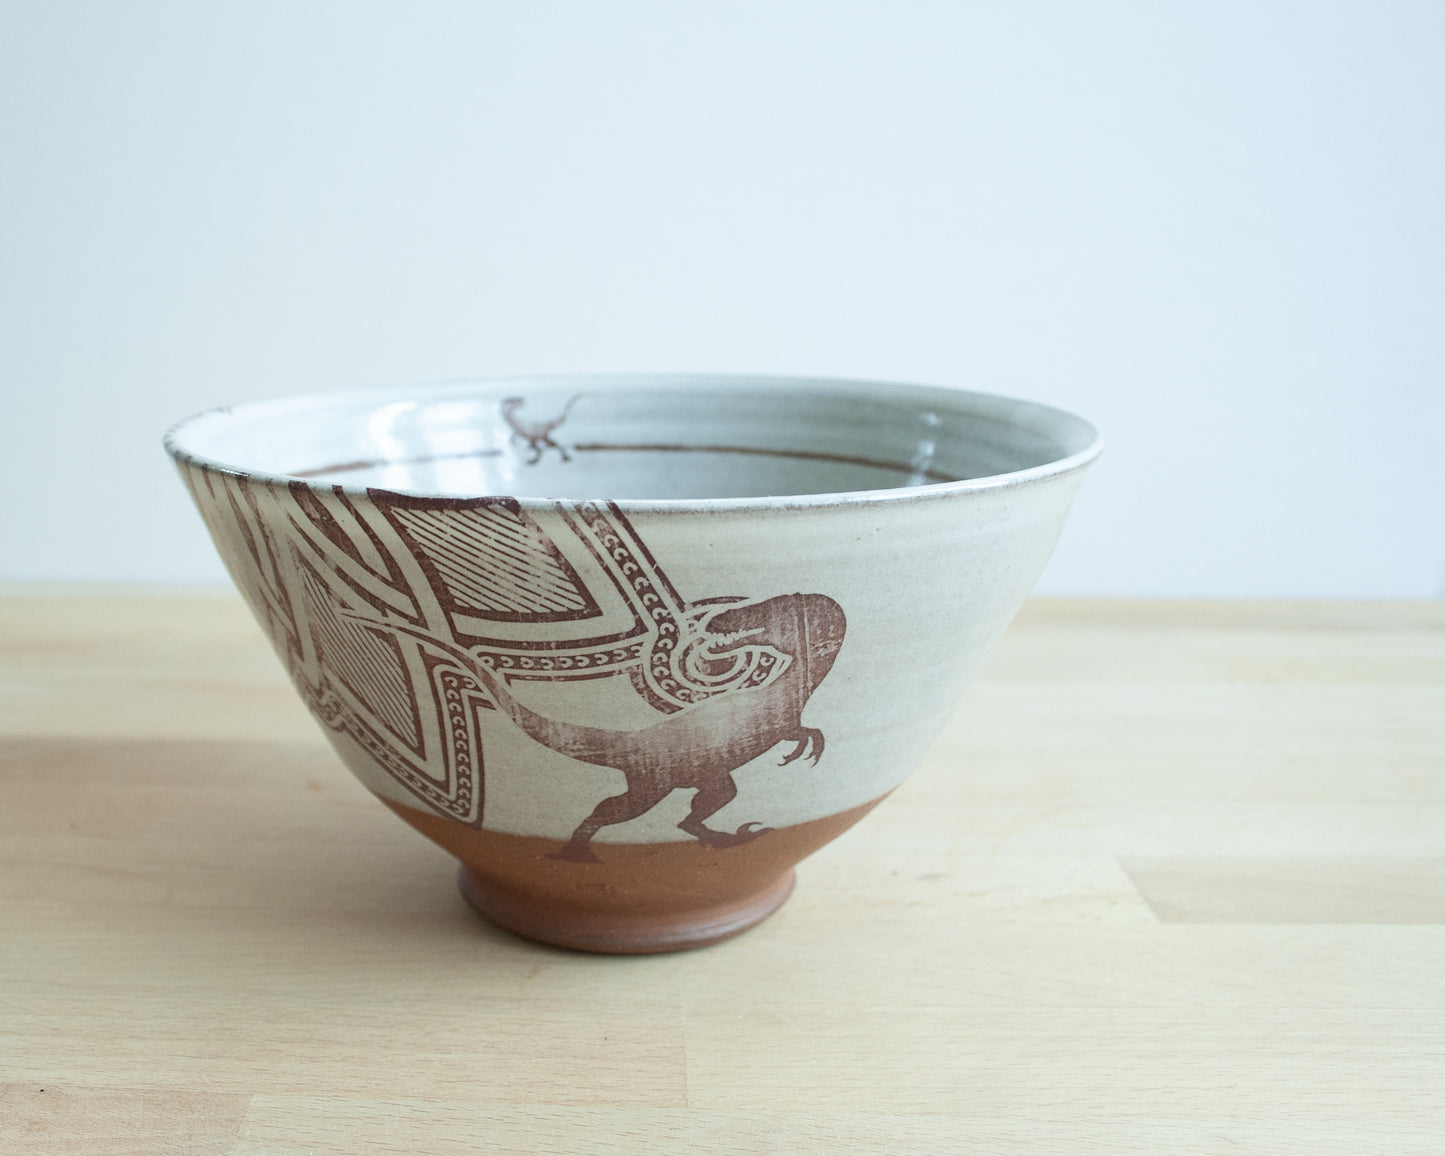 Velociraptor Noodle Bowl with background pattern - white